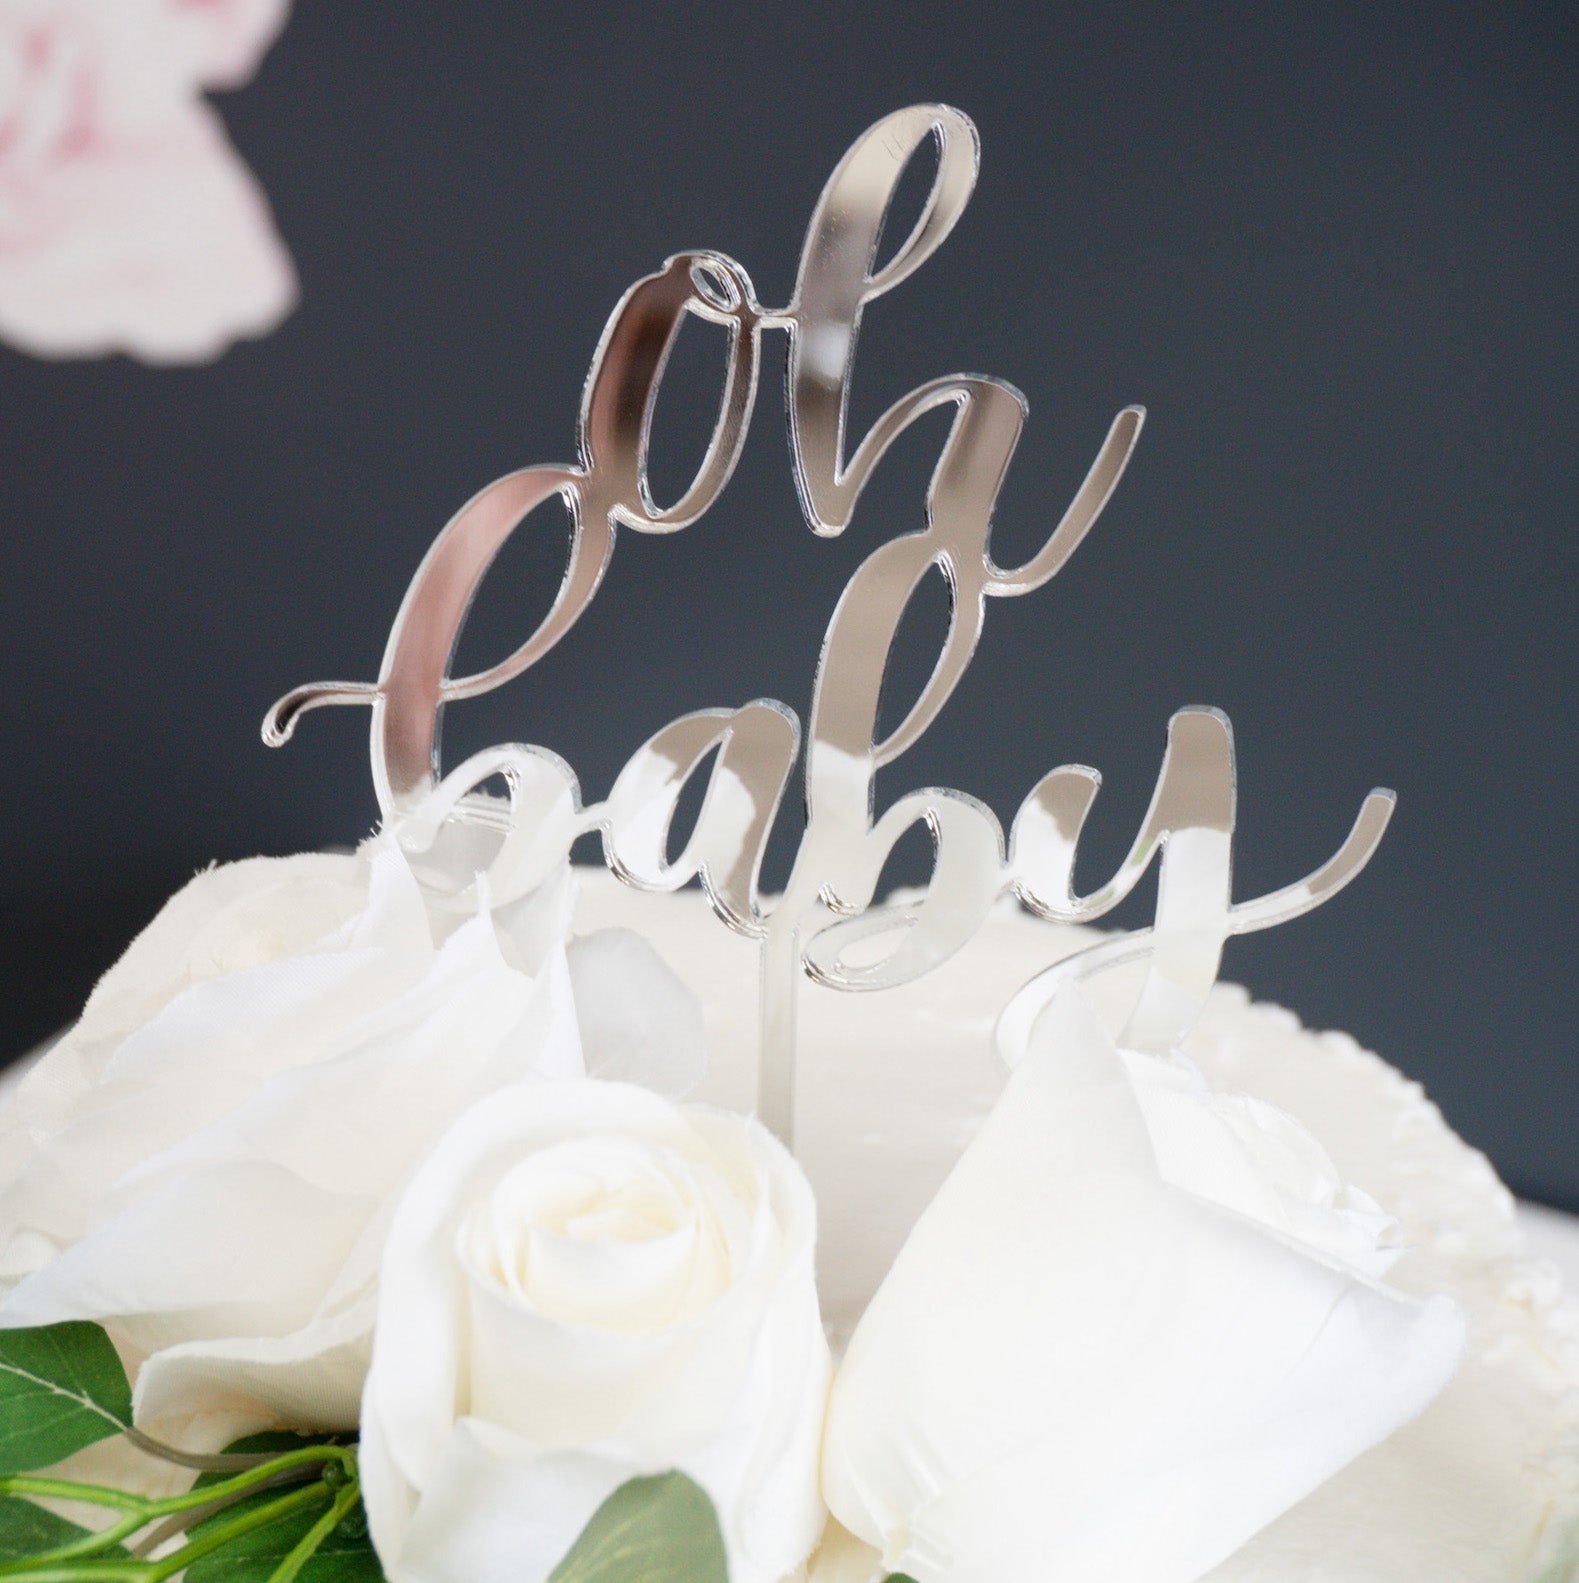 Baby Shower Cake Toppers  Baby Shower Cake Inspiration - Celebrate Cake  Toppers